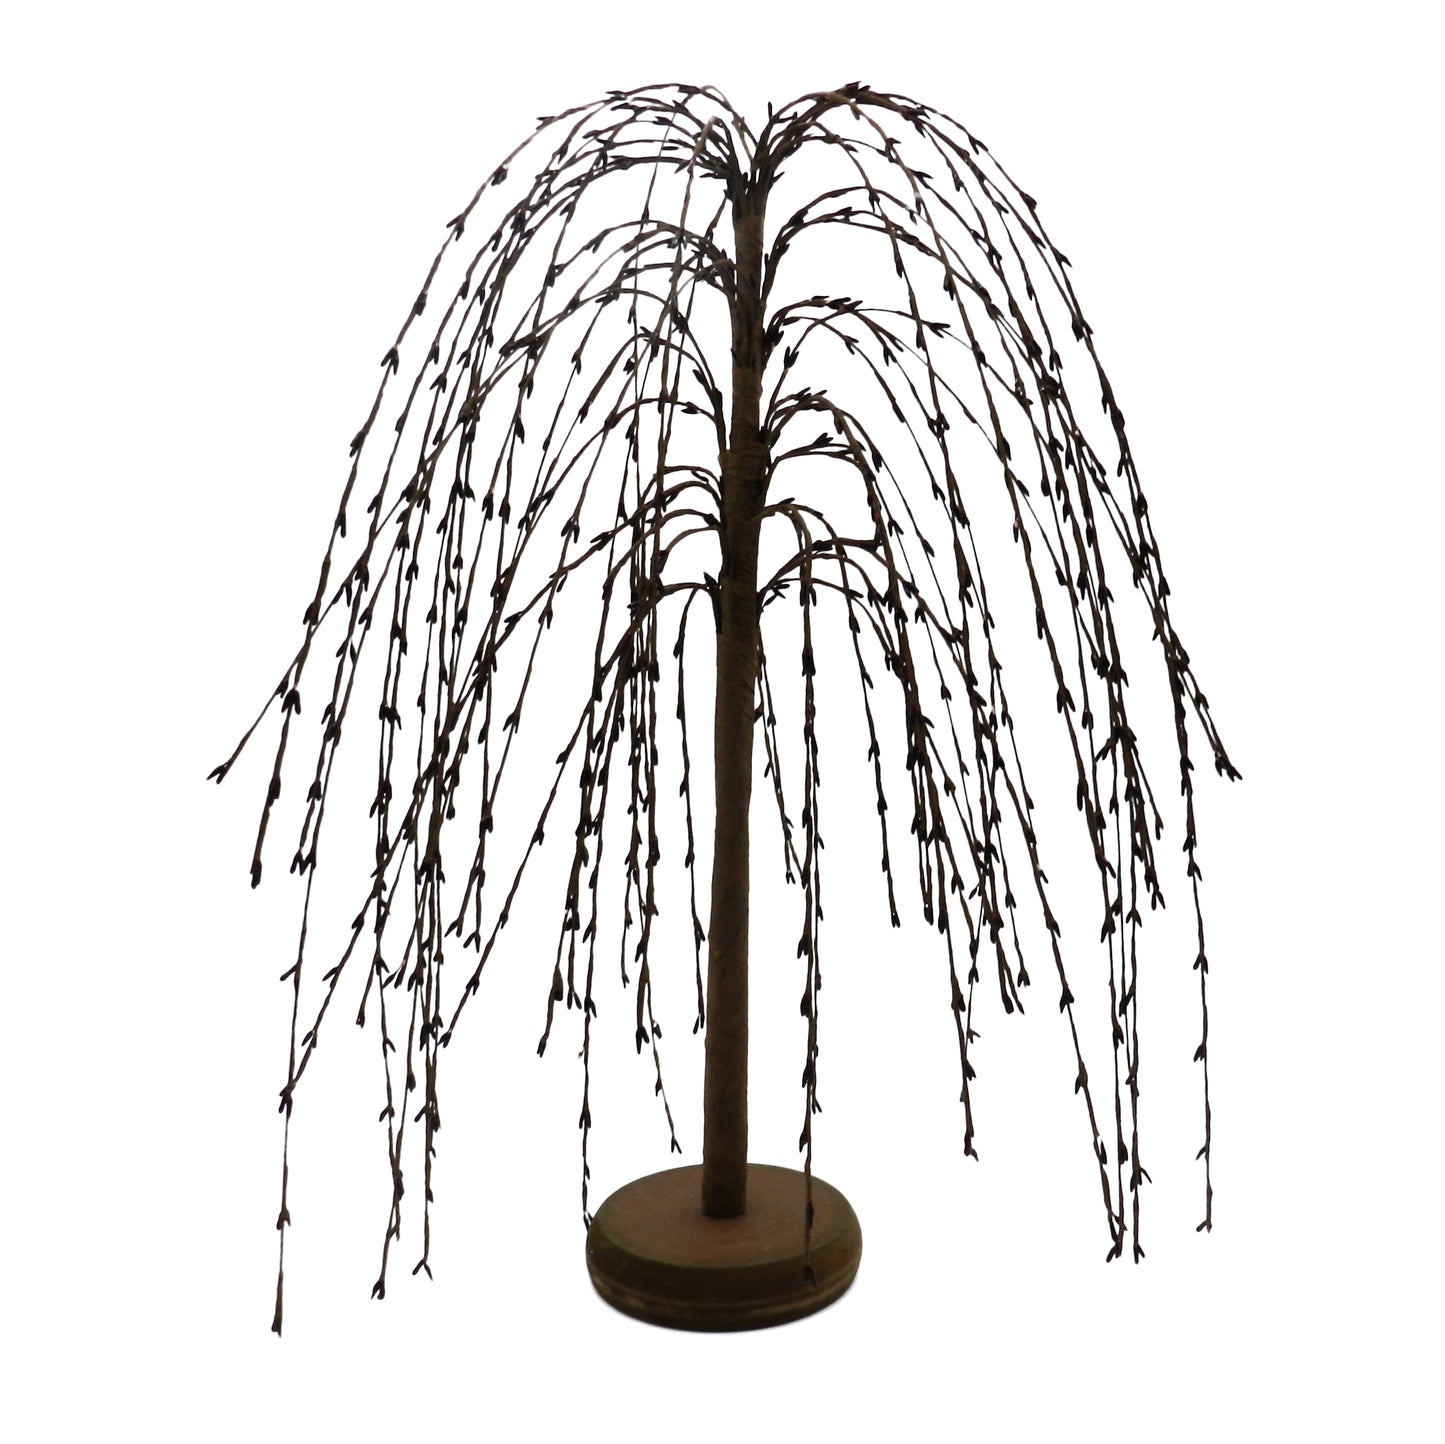 CVHOMEDECO. Burgundy Pip Berry Weeping Willow Tree Primitive Vintage Decoration Art, 18 Inch